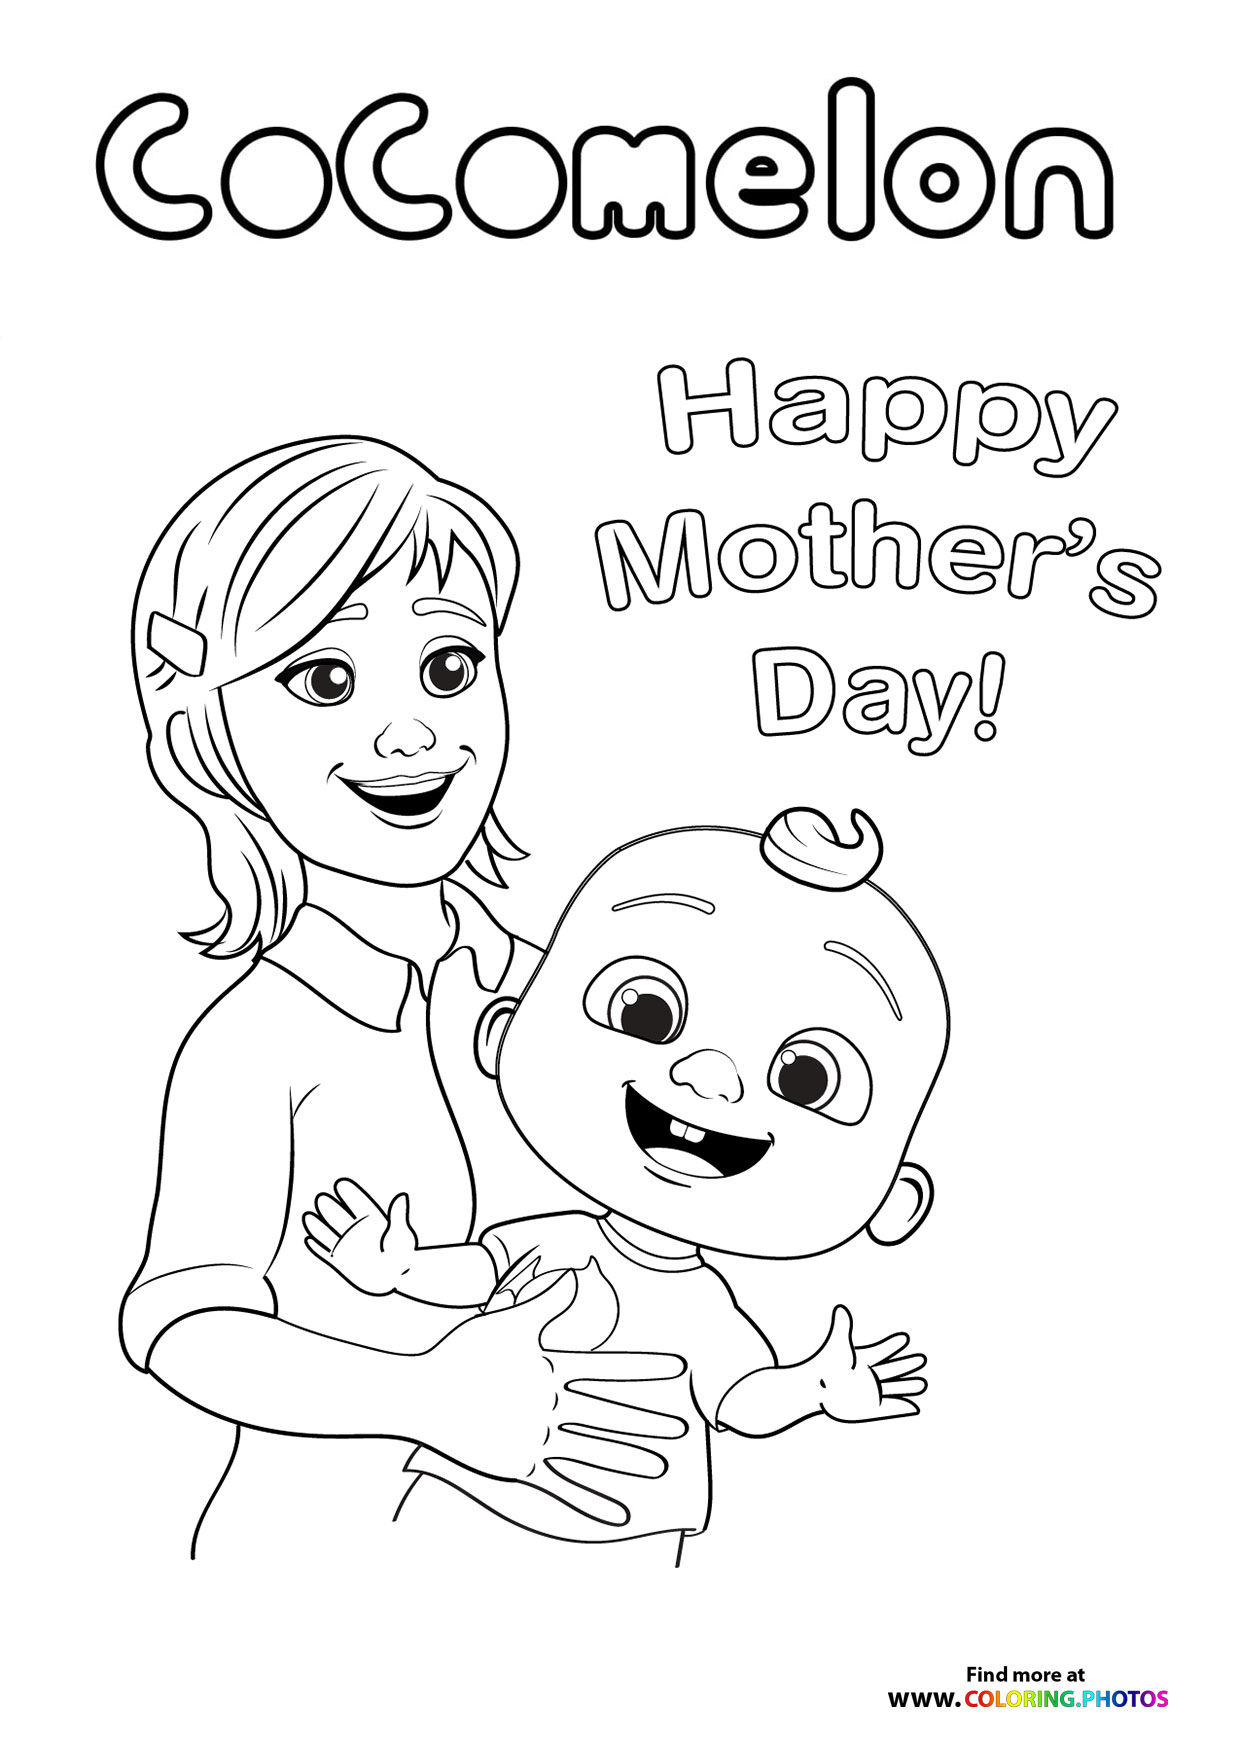 CoComelon Mother's day - Coloring Pages for kids